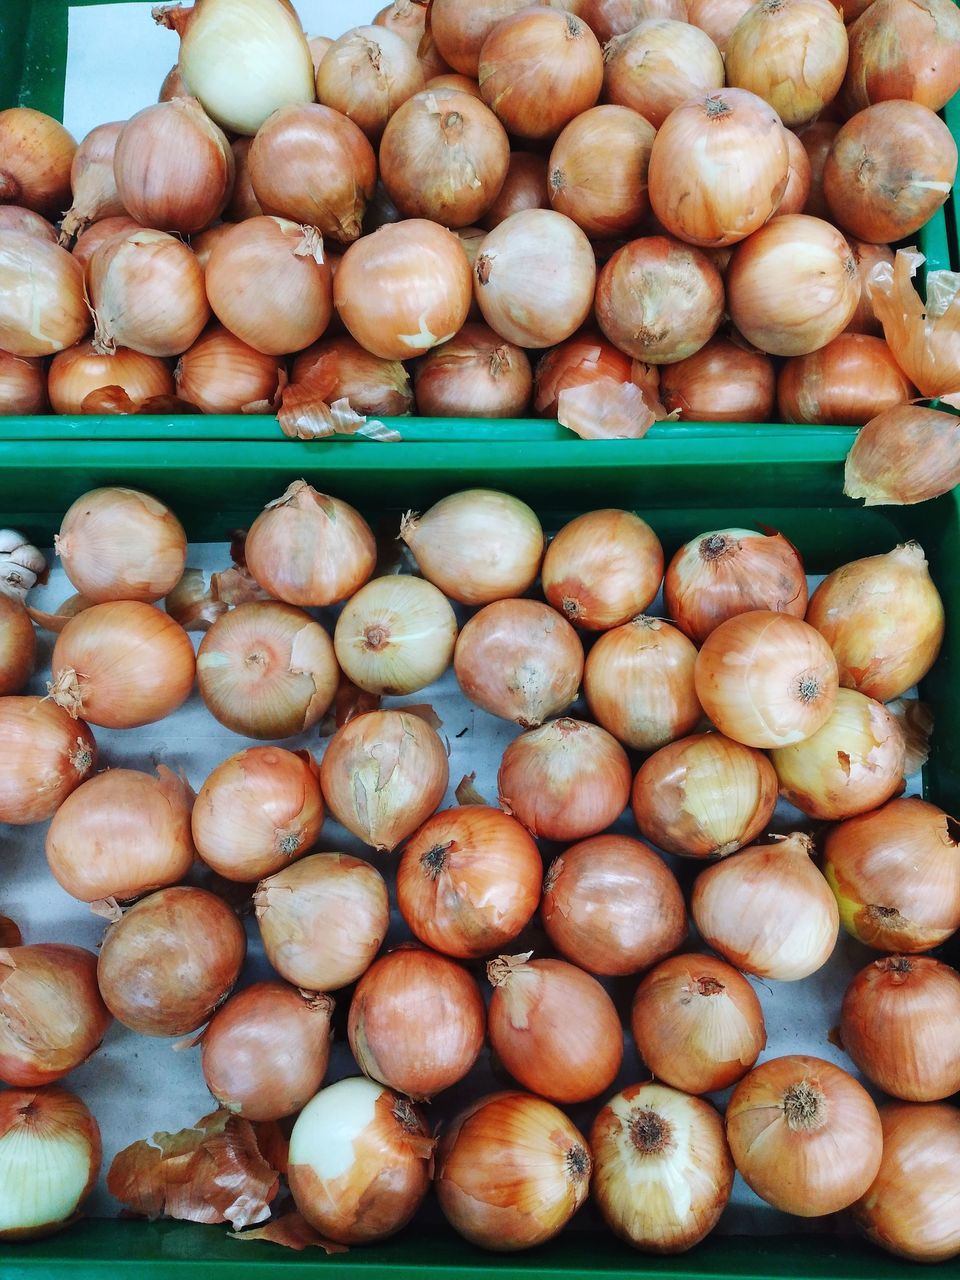 High angle view of onions for sale at market stall